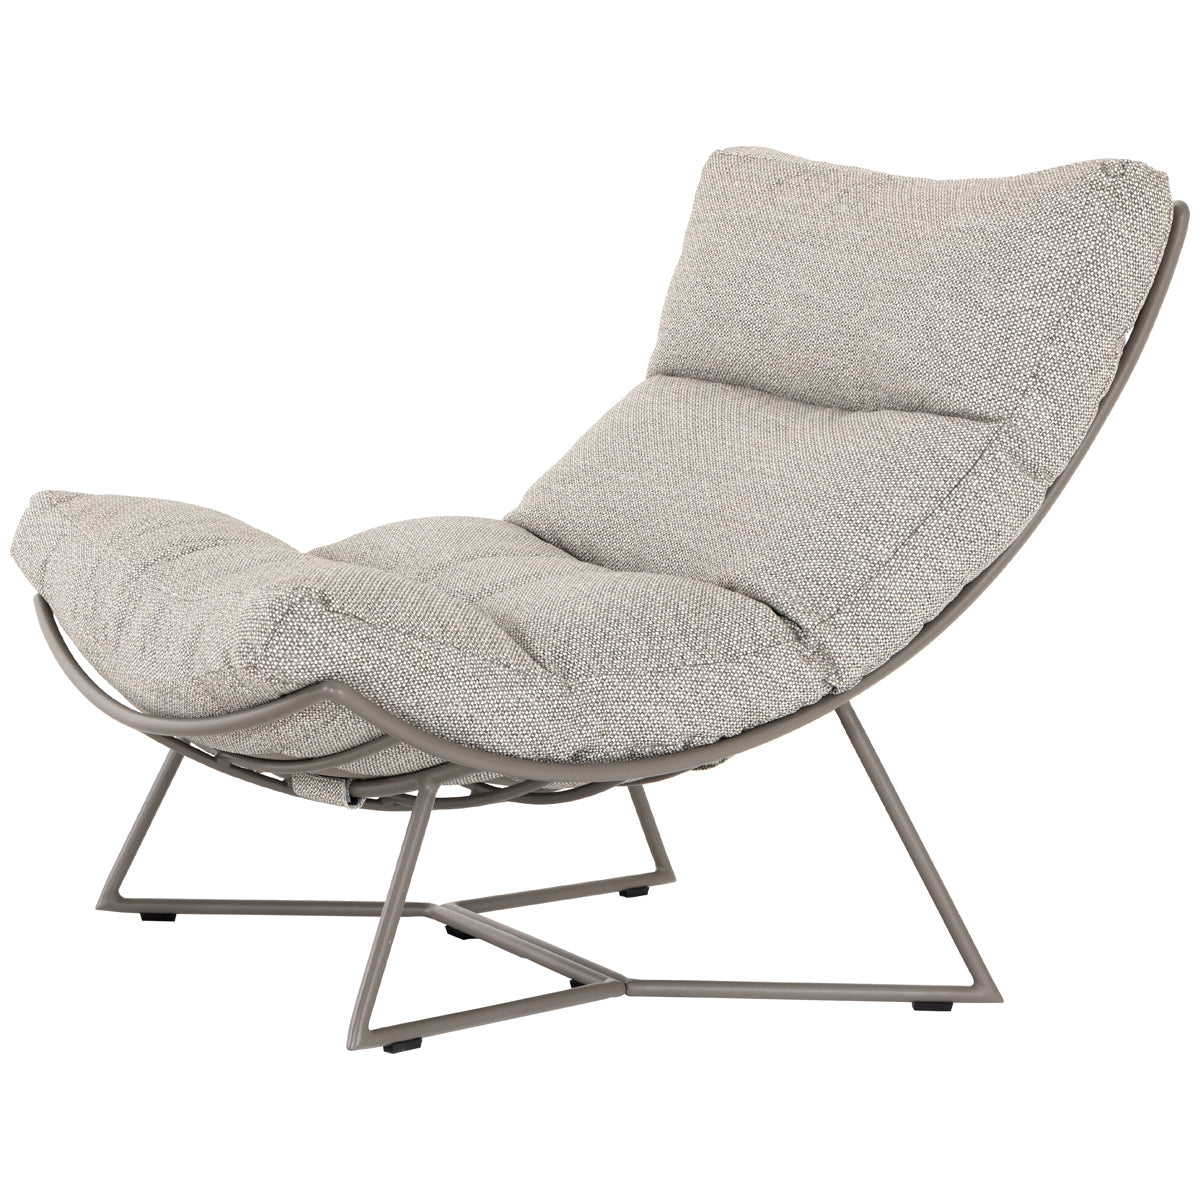 Four Hands Solano Bryant Outdoor Chair